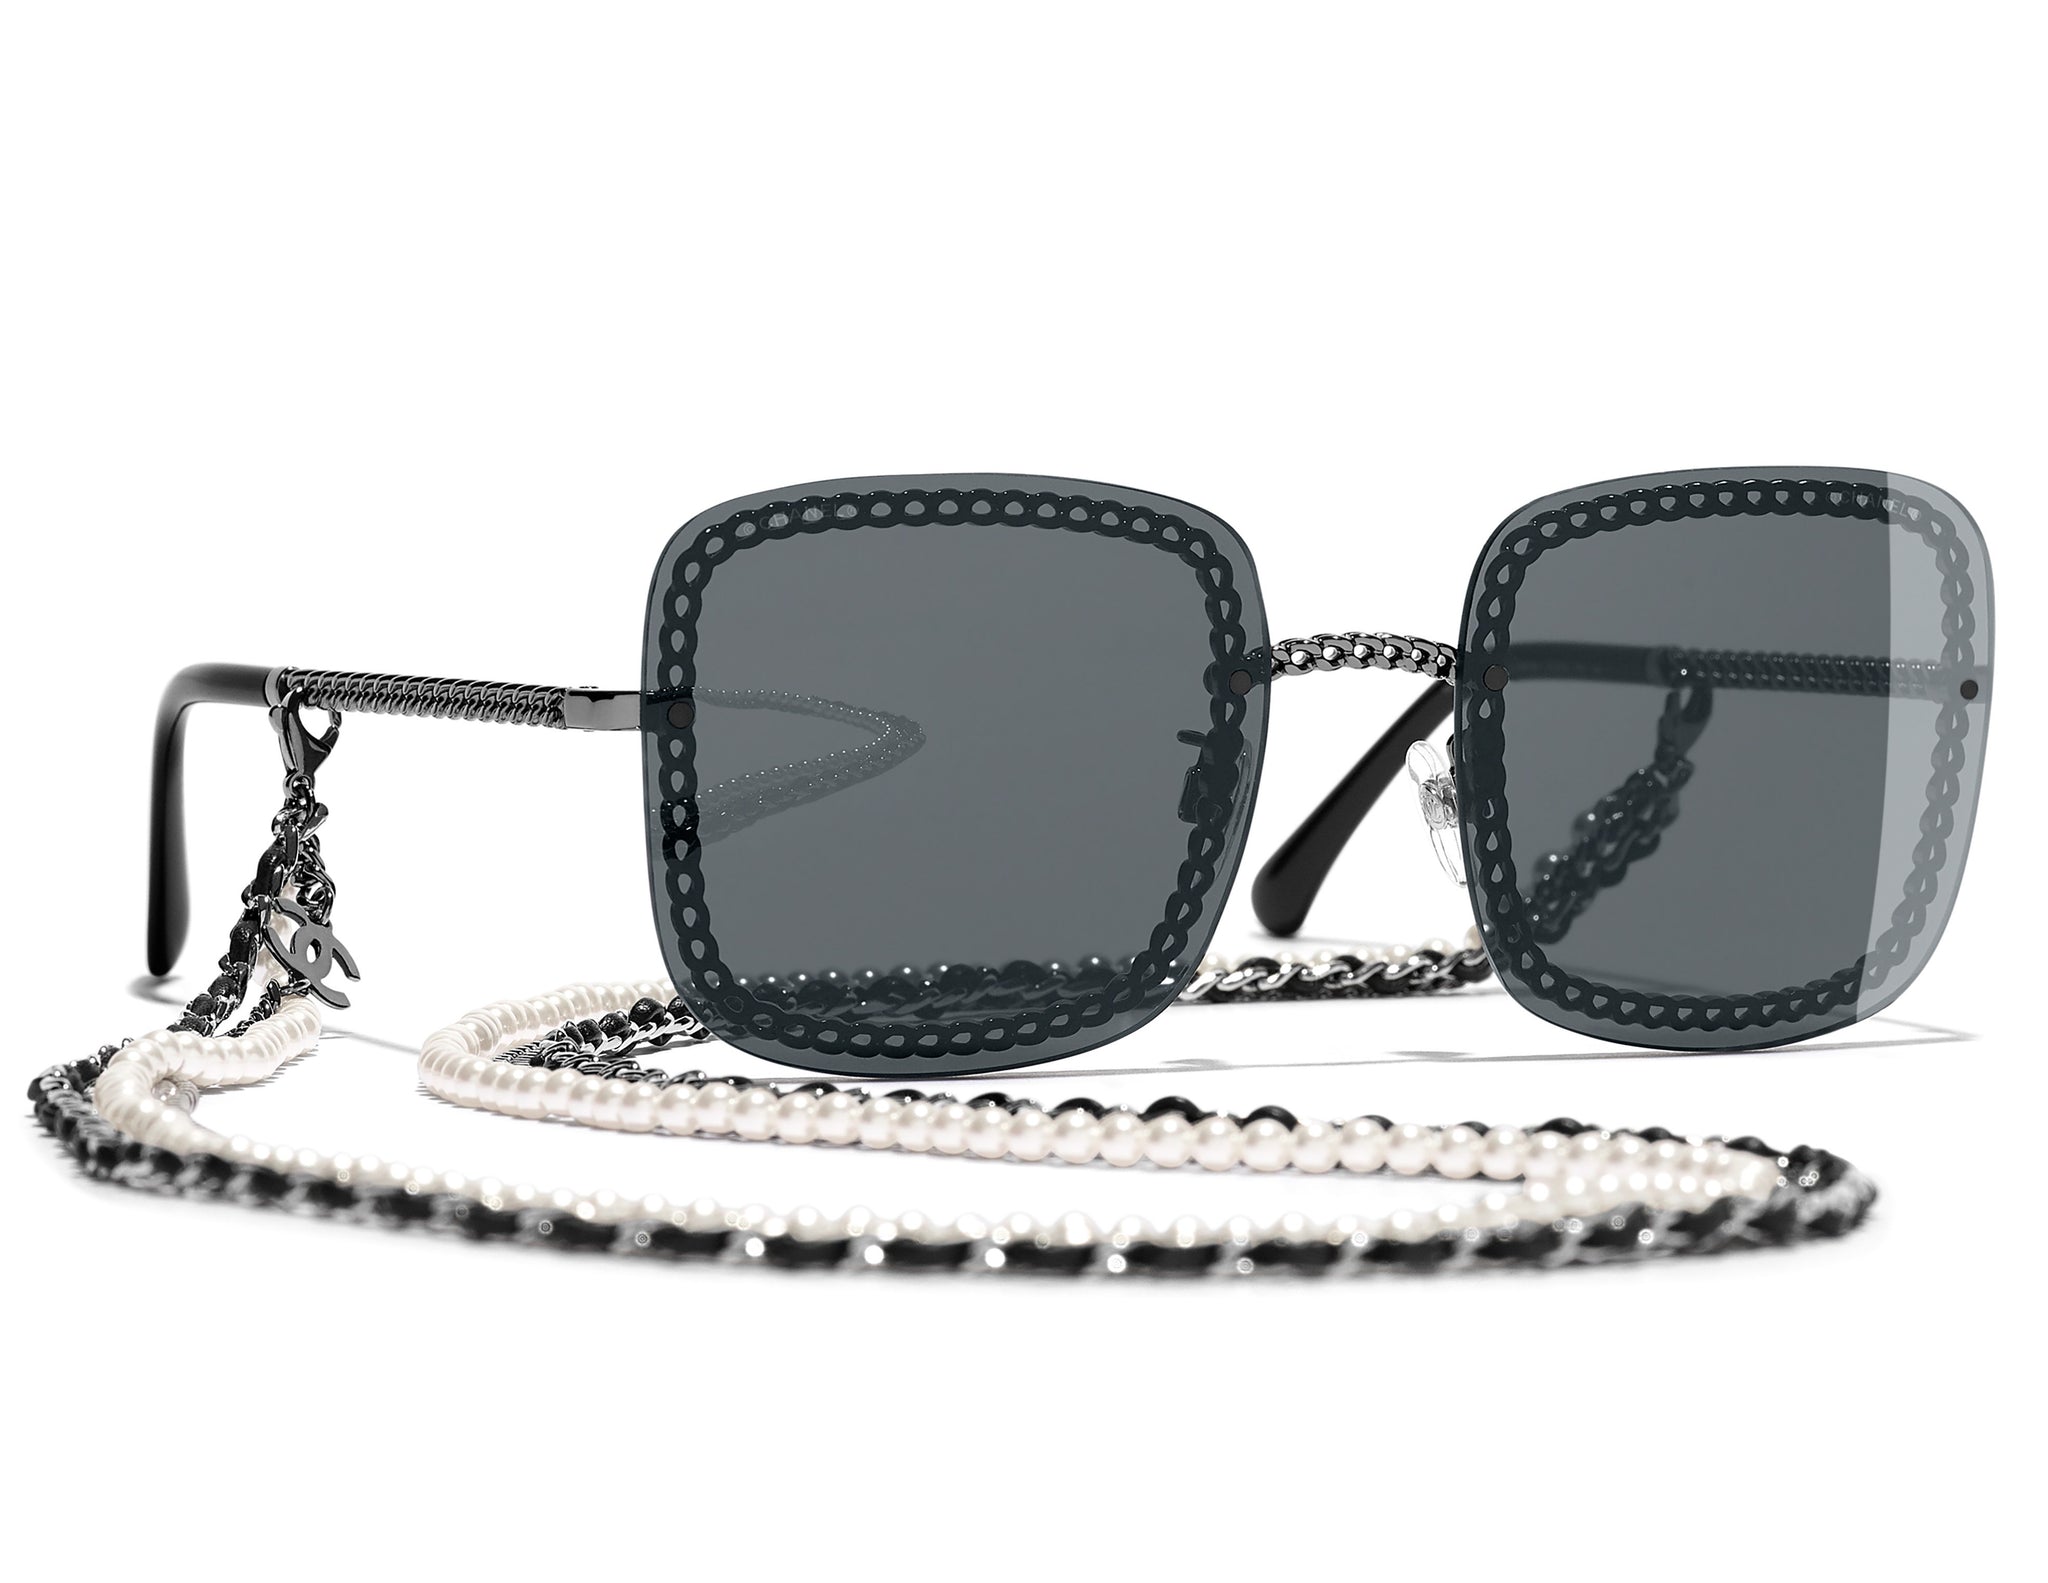 How to wear eyewear chains and not look like your grandma